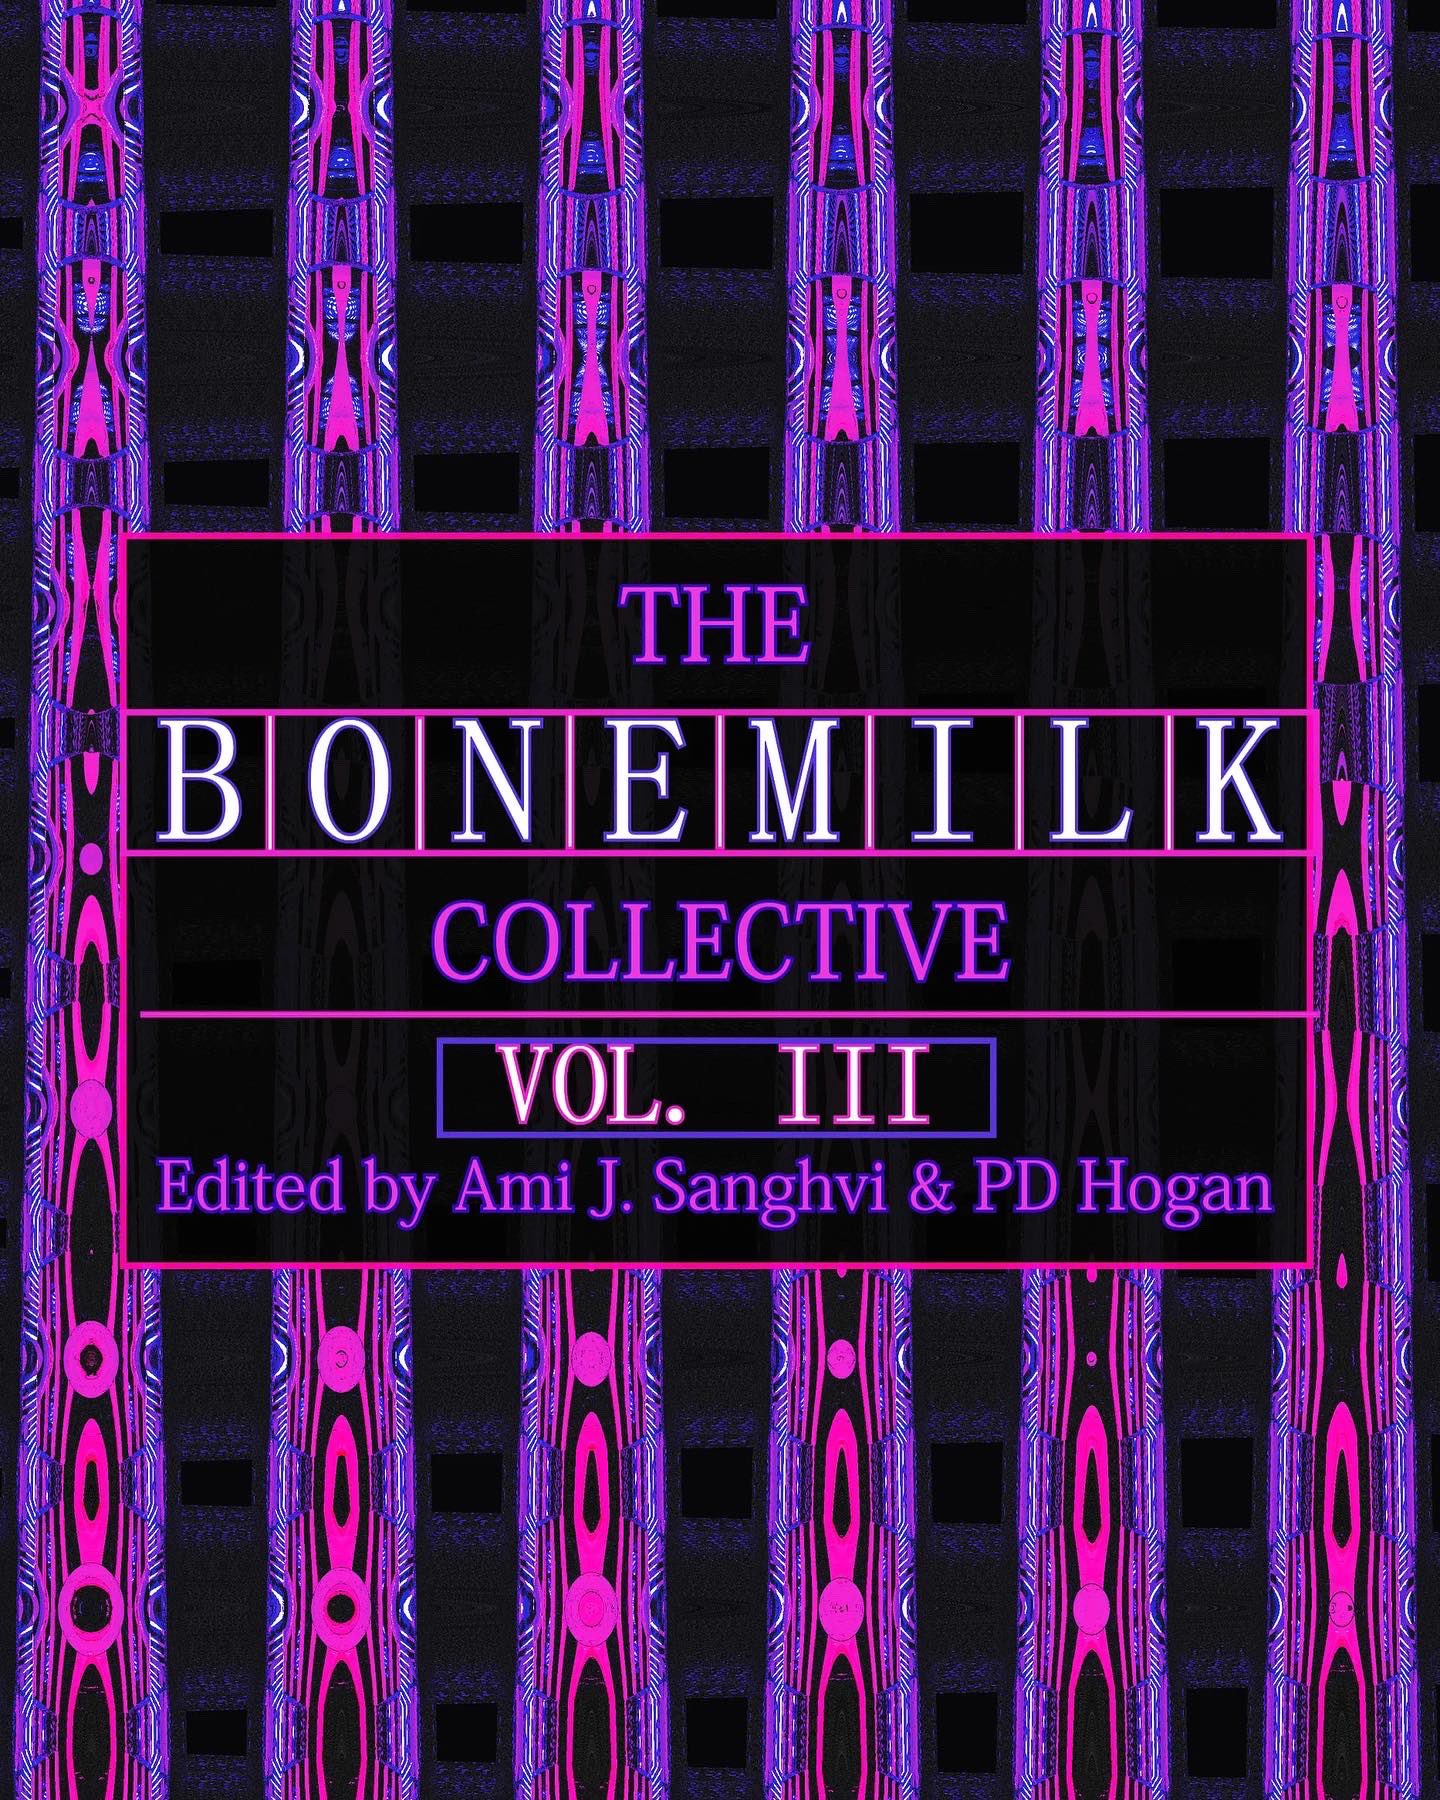 Book cover for "The BONEMILK Collective, Vol. III". The design is of alternating vertical stripes of black and a vibrant psychadelic pink-purple.